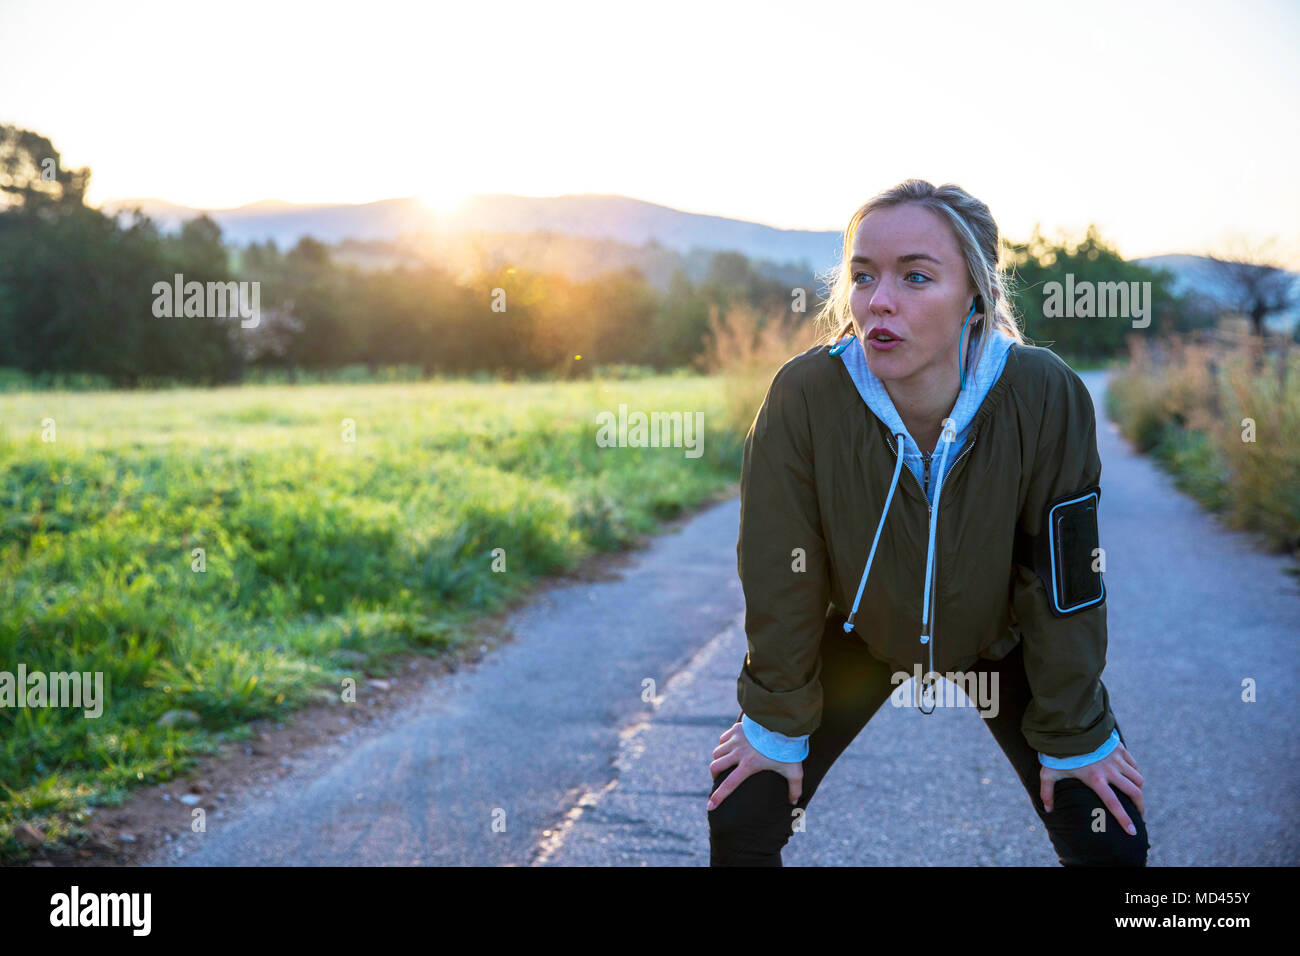 Young woman outdoors, taking a break from exercising, hands on knees Stock Photo